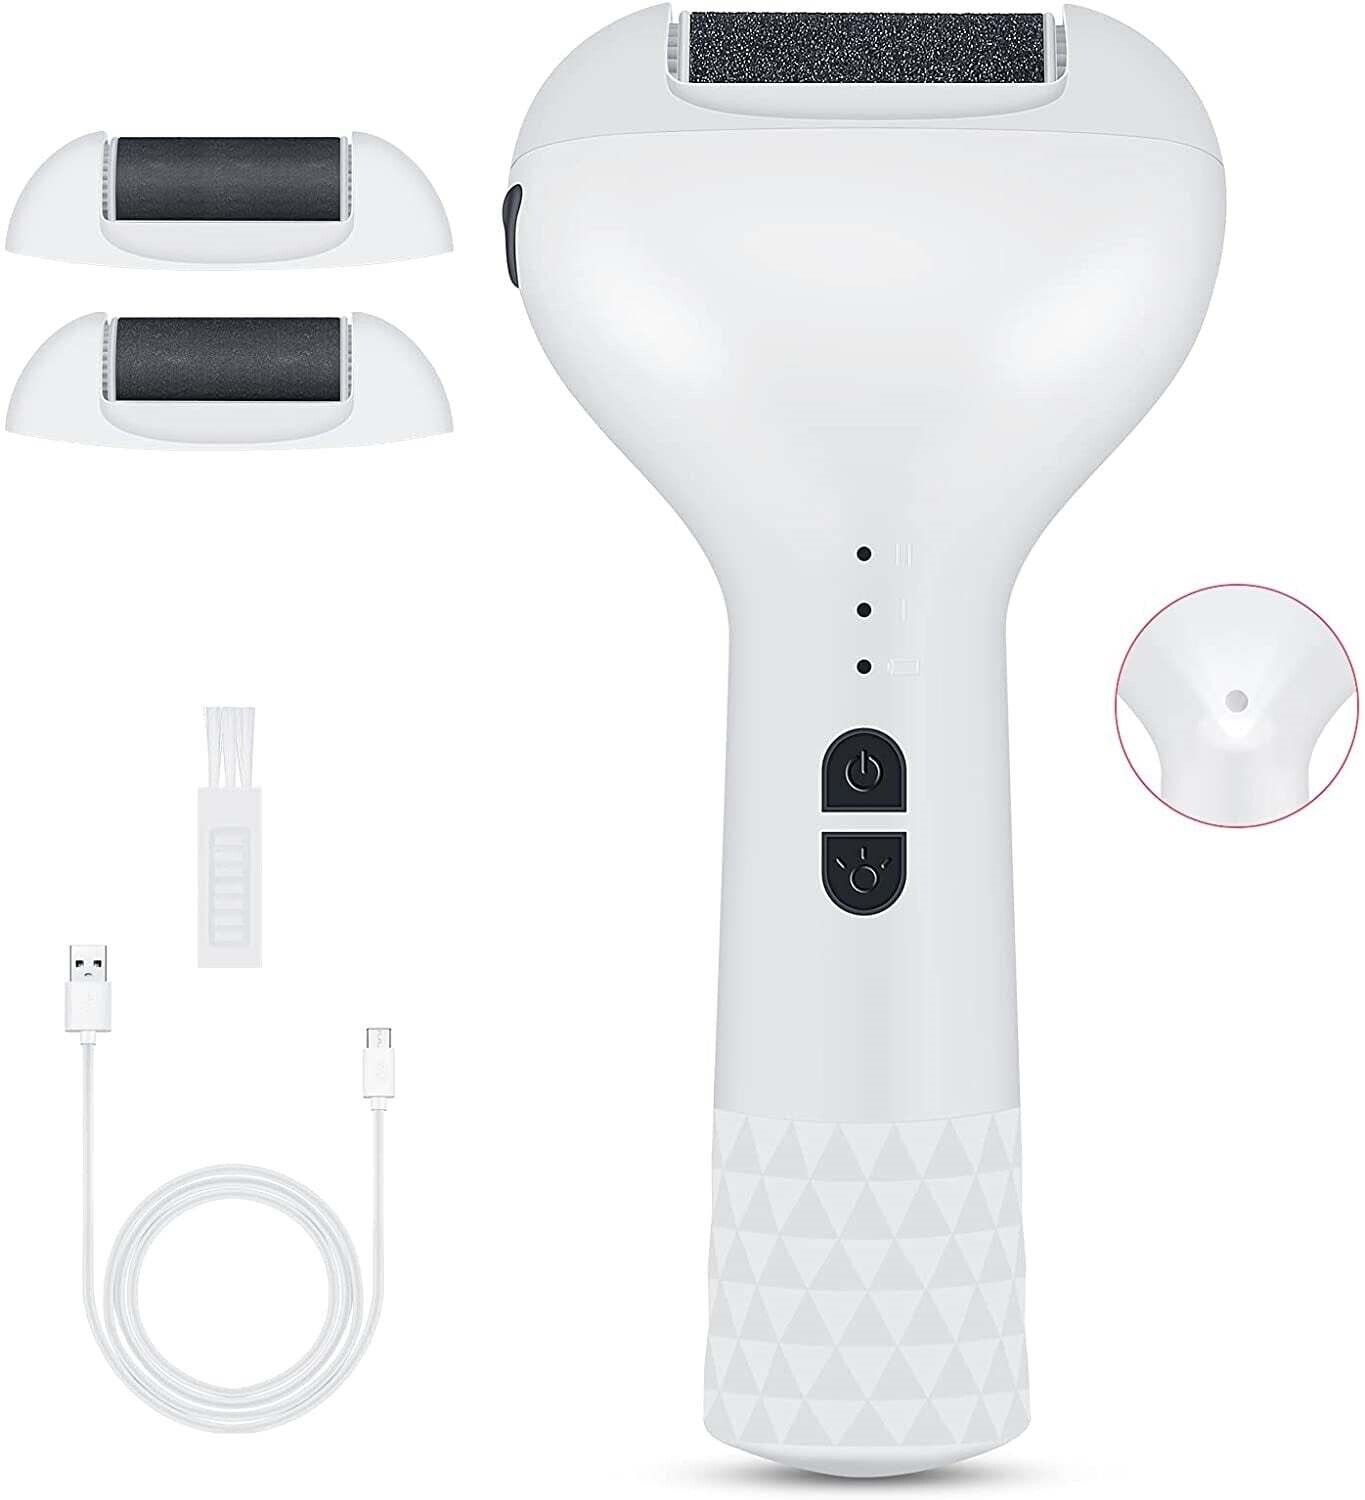 USB Charging Hard Dry Skin Cuticle Cocoon Removal